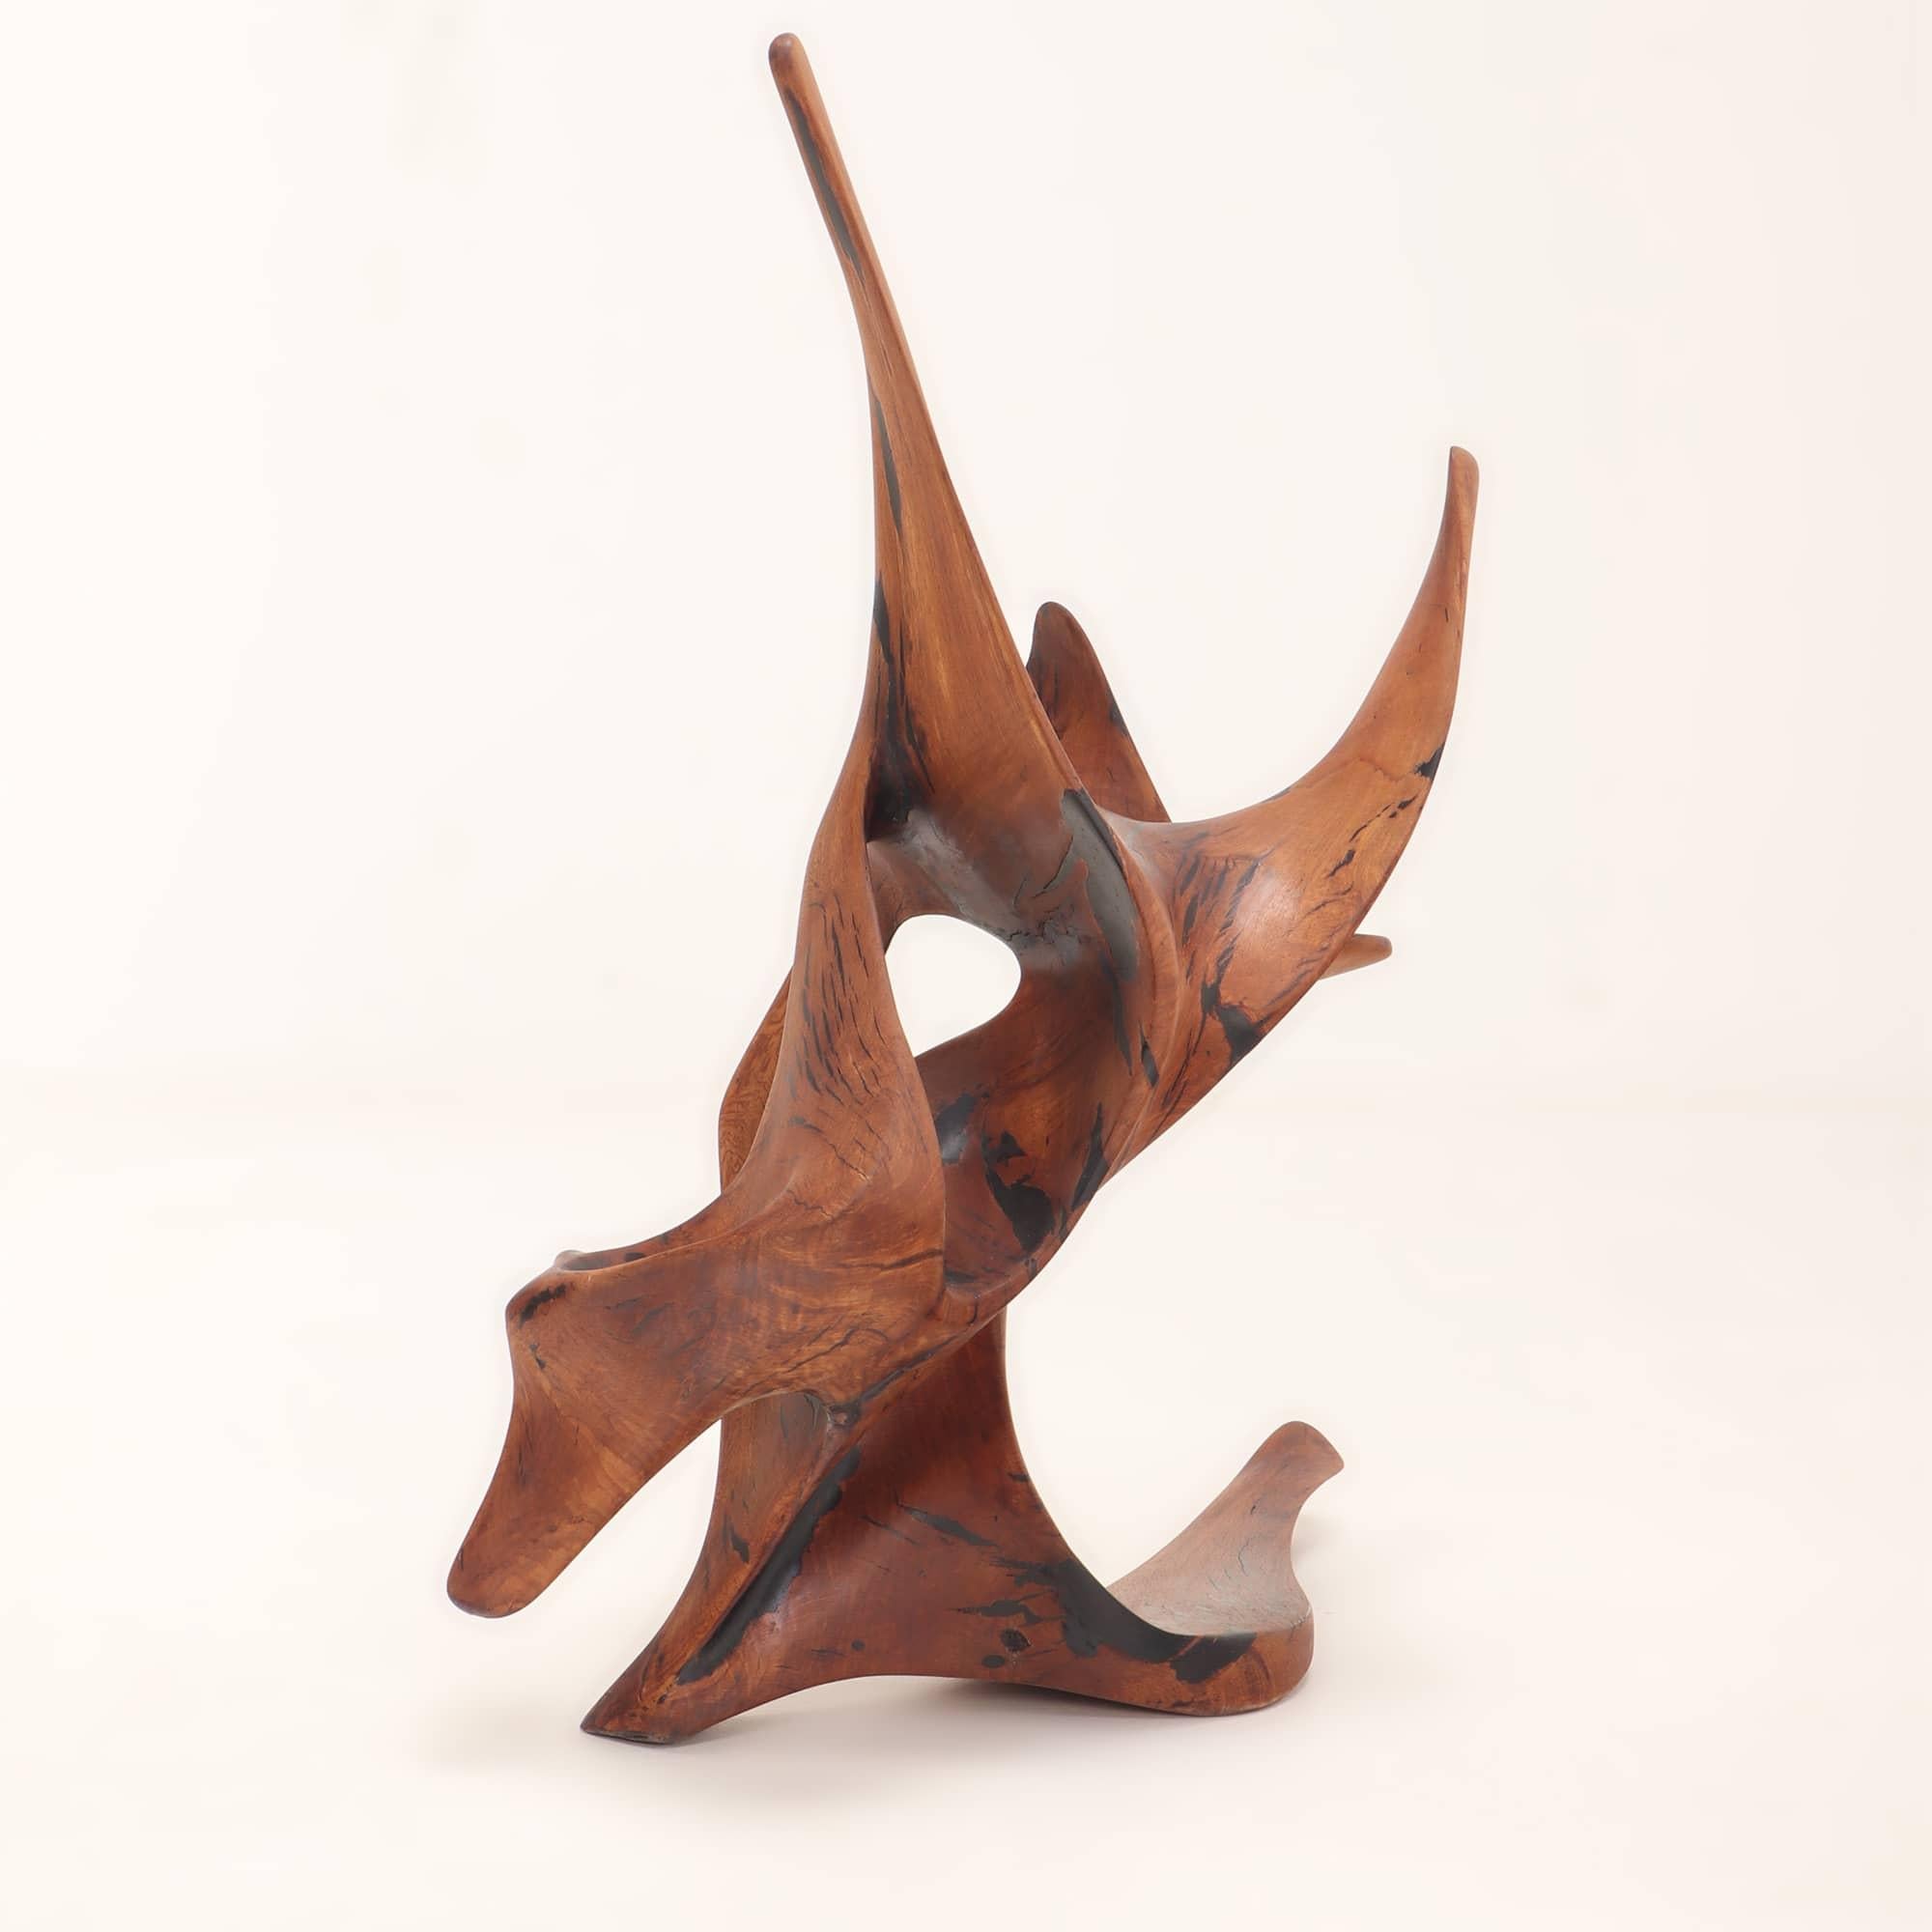 English John Spielman (British, born 1944) large abstract carved wood sculpture c. 1970 For Sale